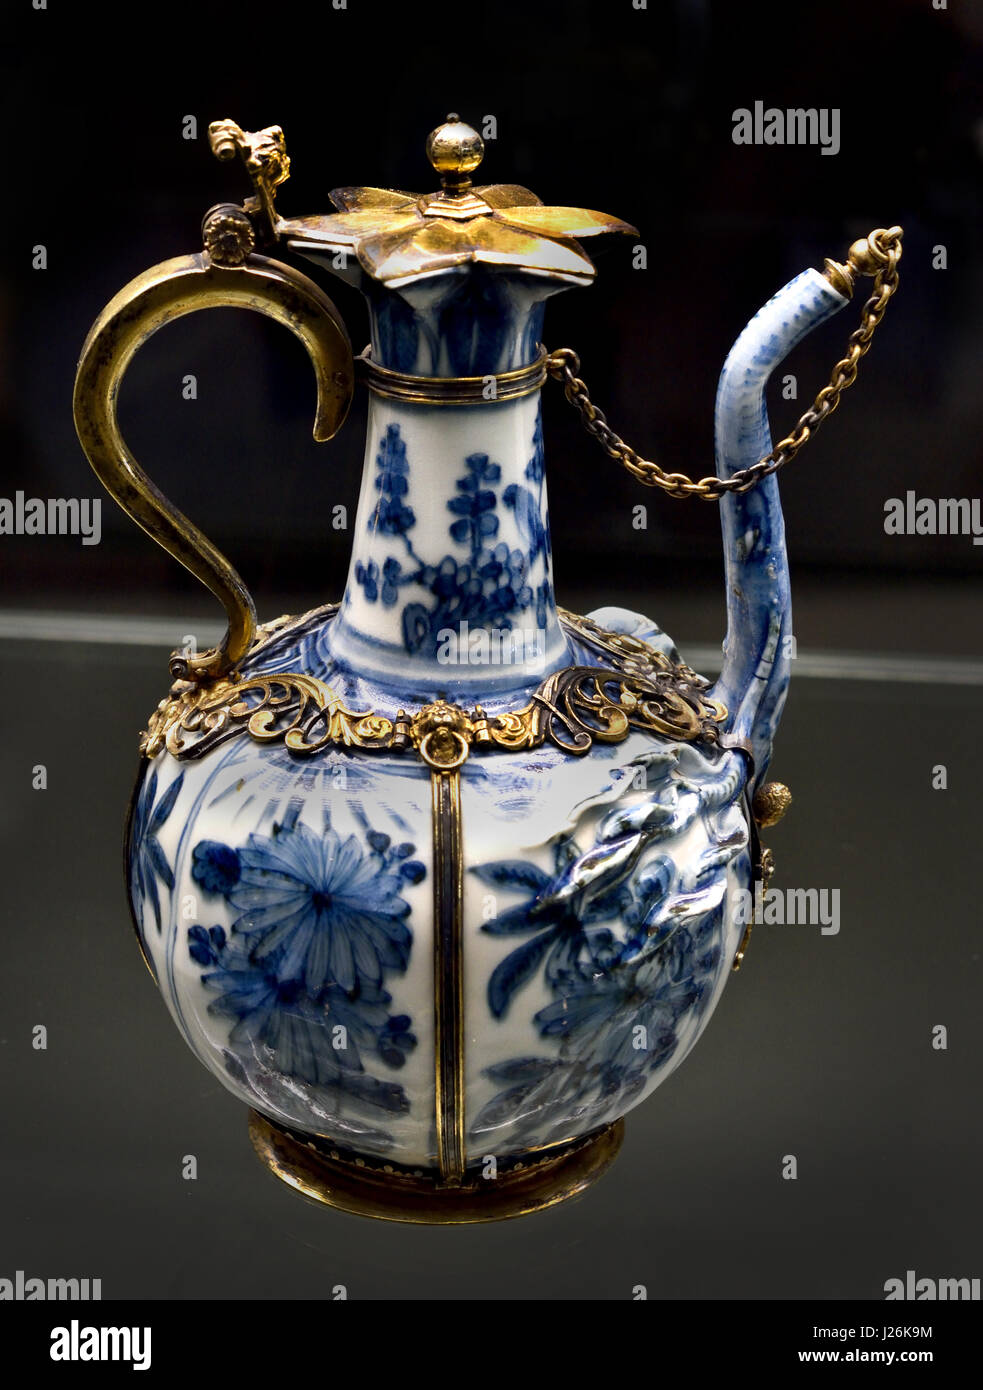 Jug with silver gilded frame China porcelain Silver Gilded Georg Berger, Erfurt Germany End of the 16th century Stock Photo